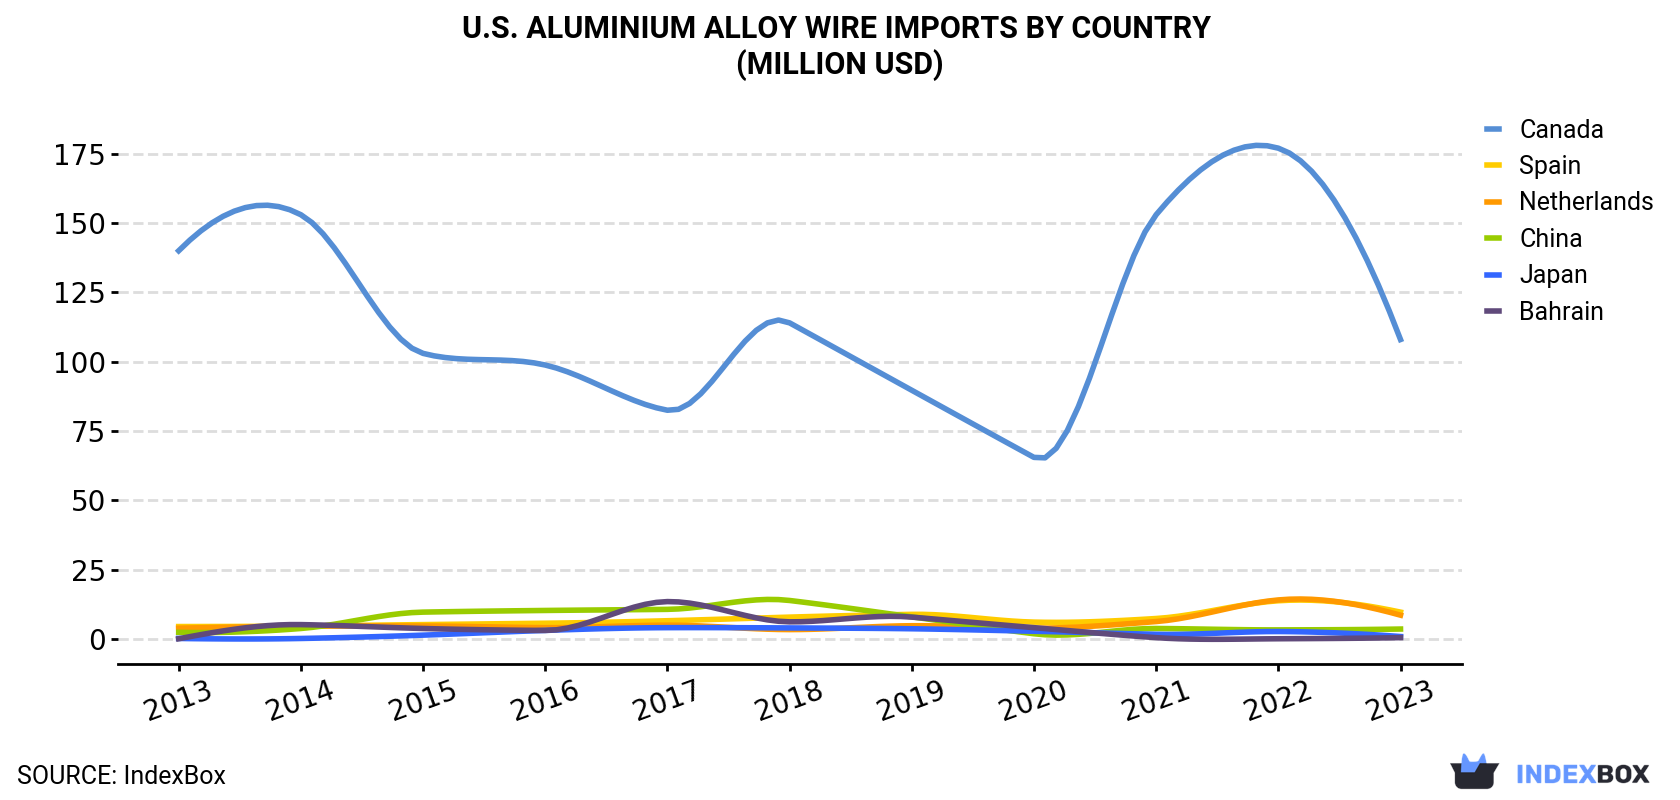 U.S. Aluminium Alloy Wire Imports By Country (Million USD)